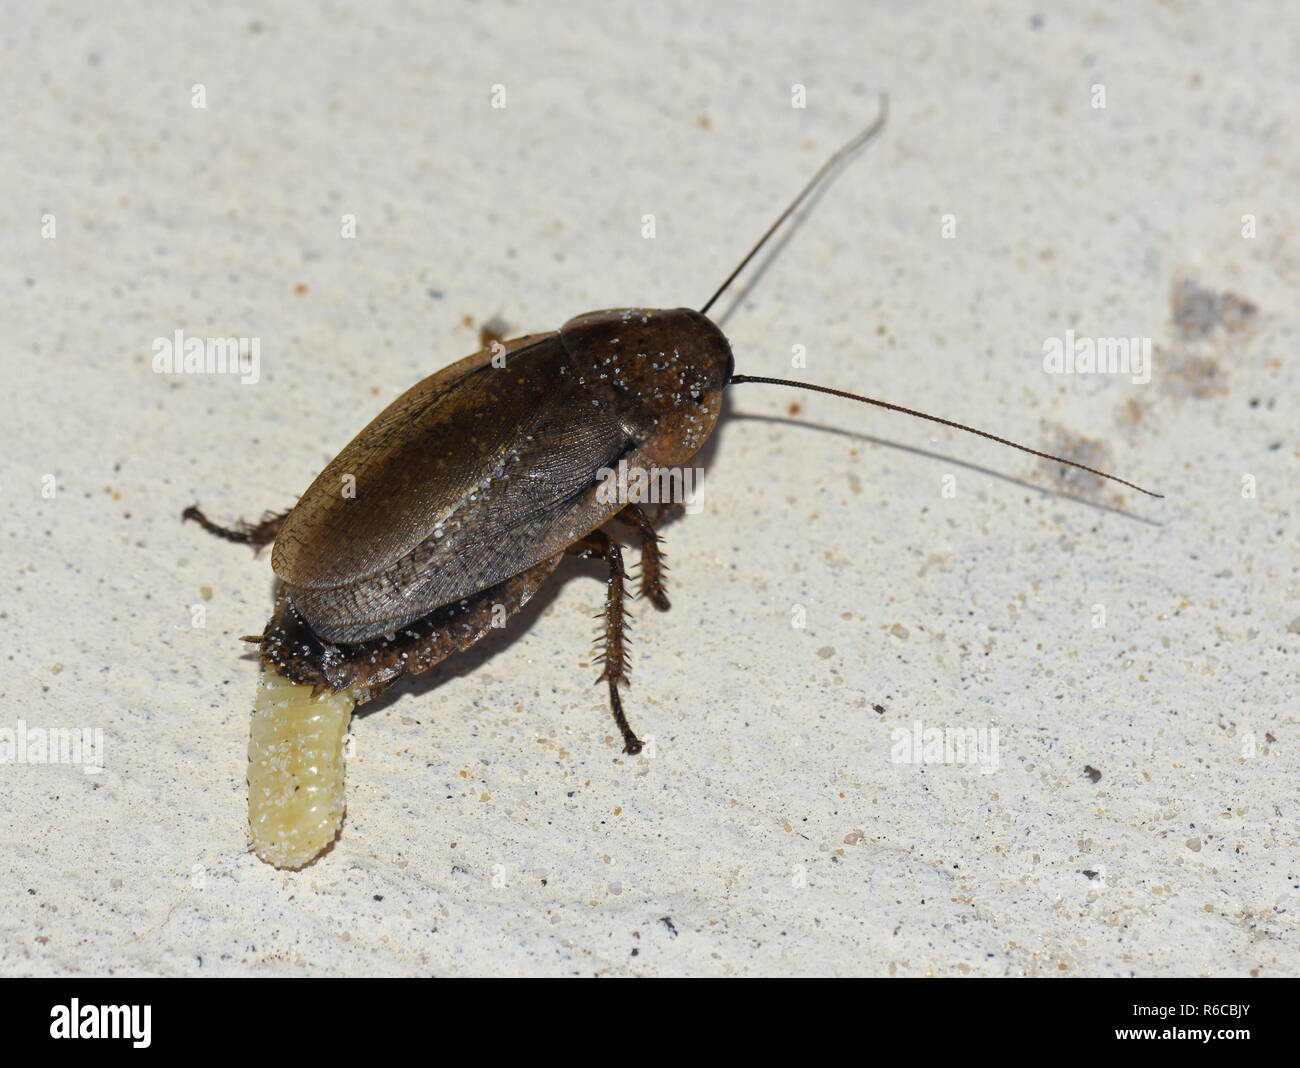 Female cockroach laying an ootheca egg case Stock Photo